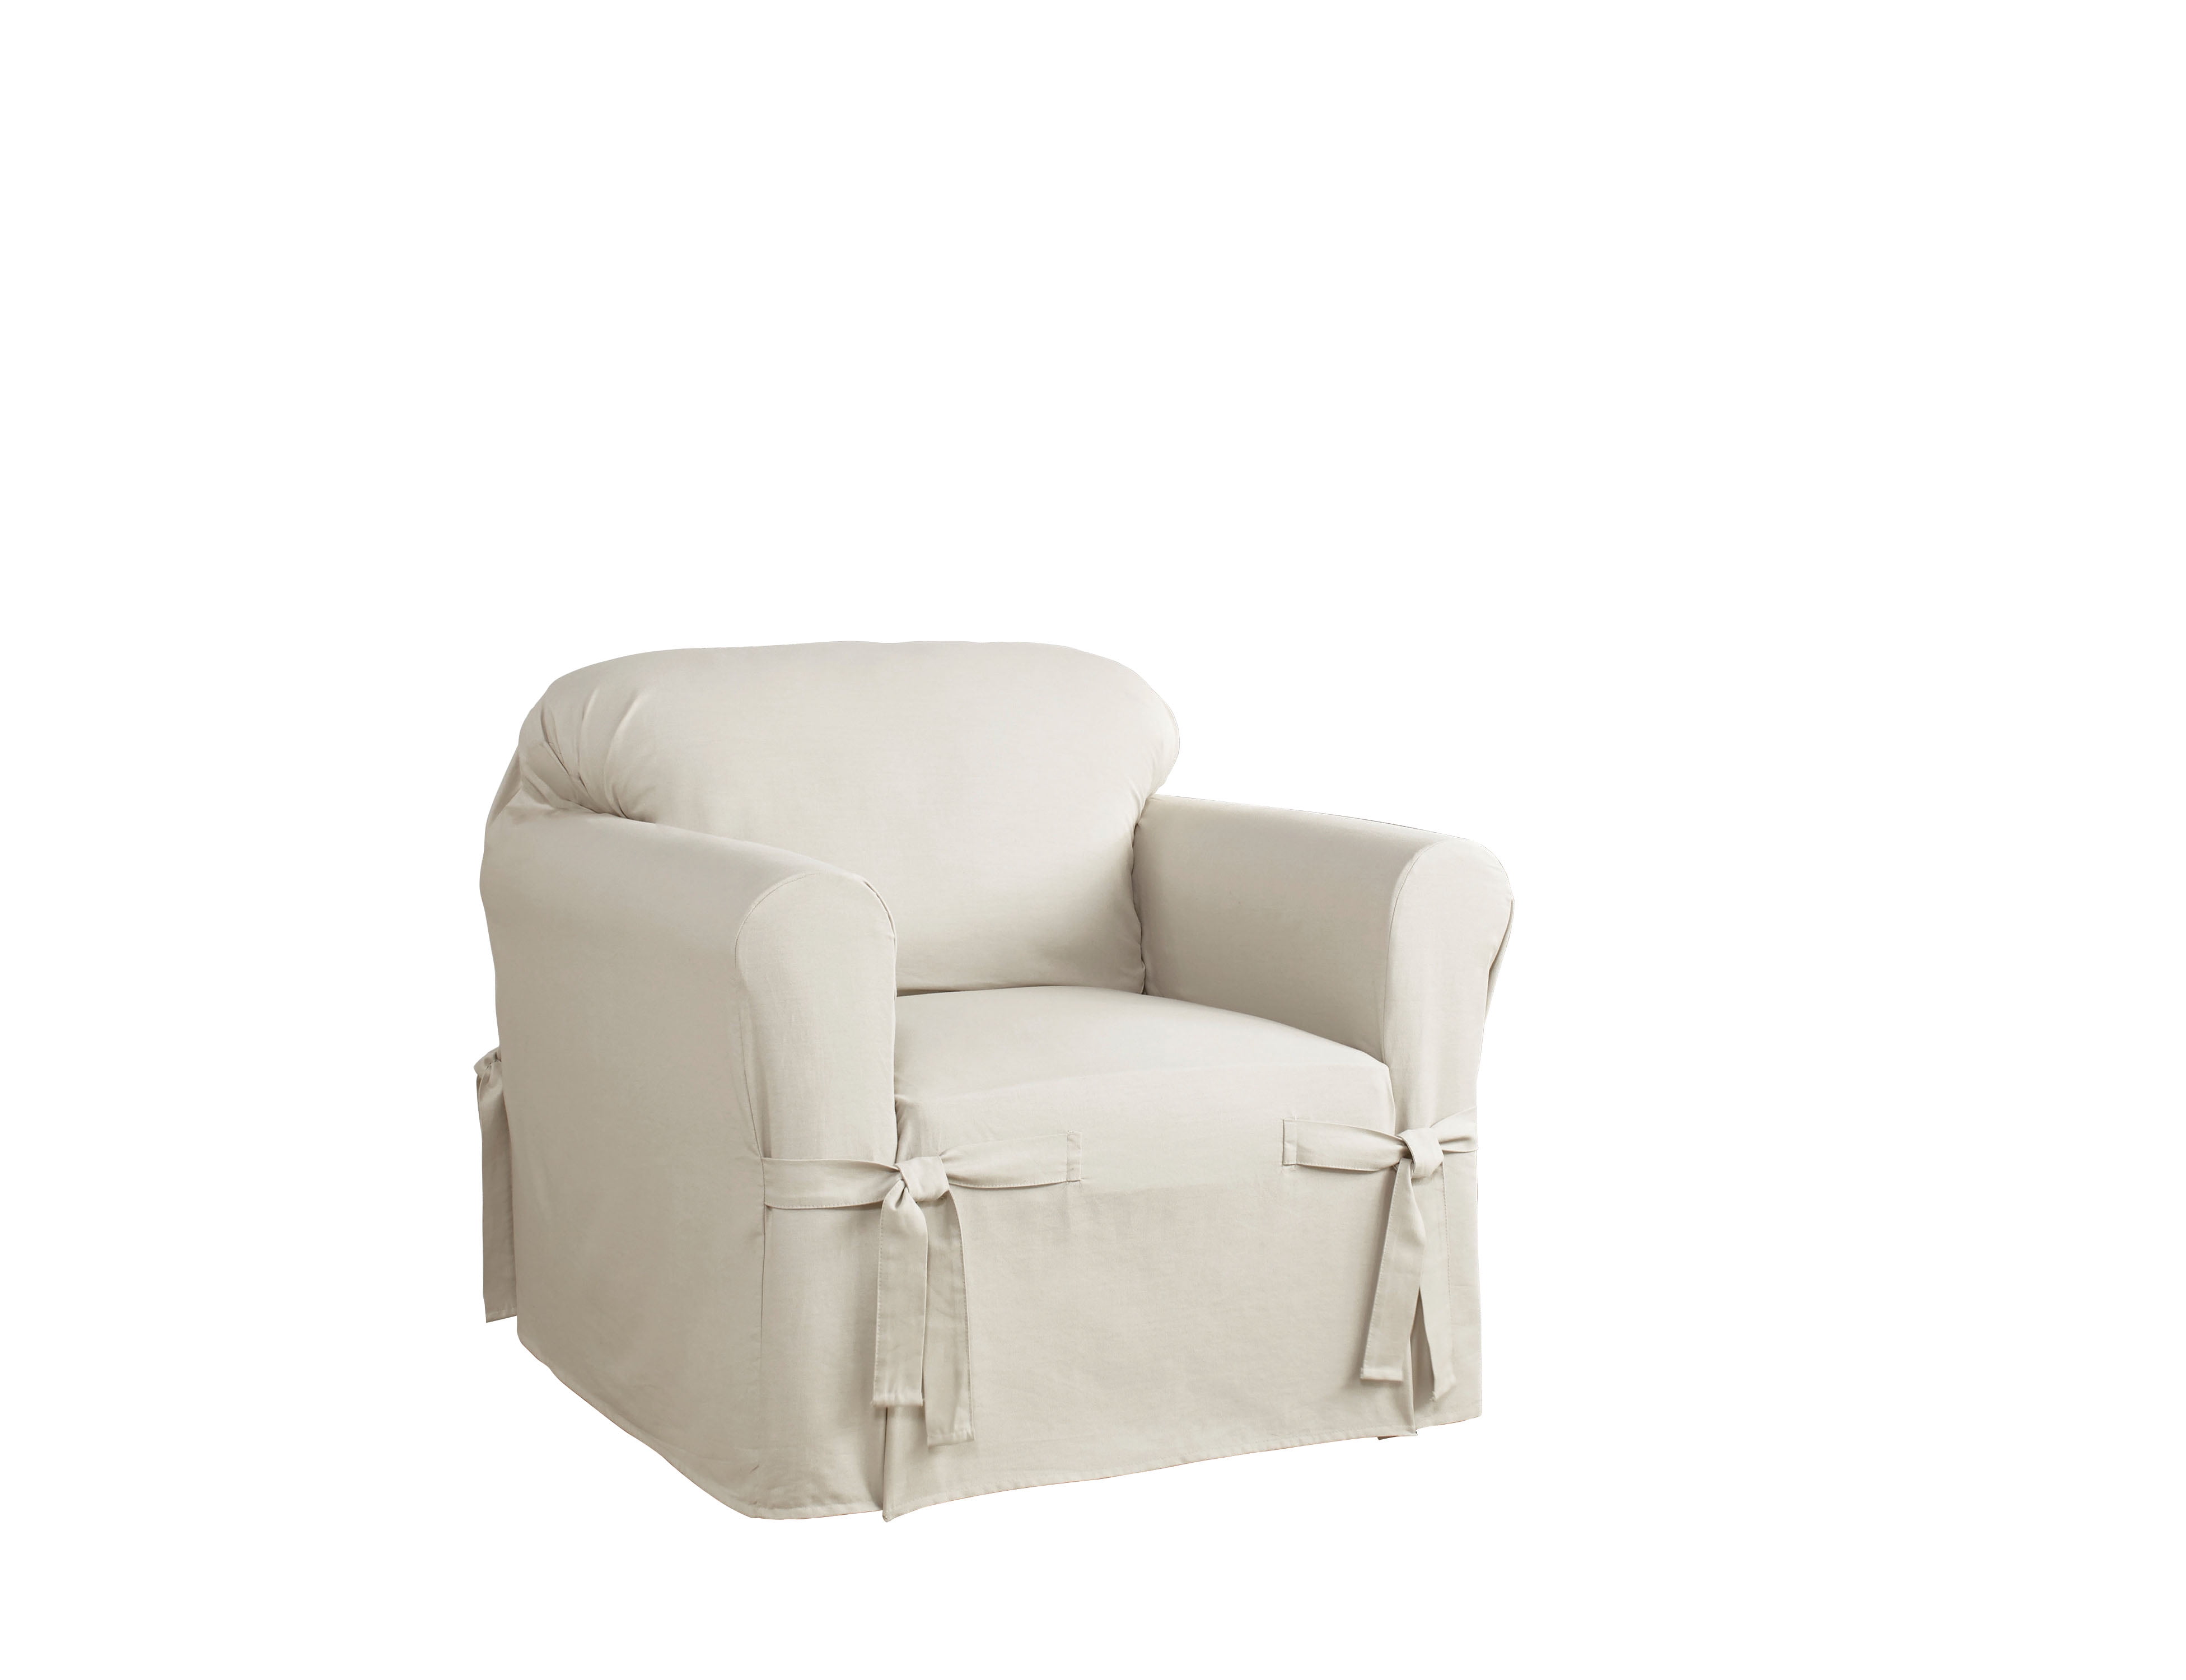 Uboxes CHAIRCOVER01 72 x 46 in. Chair Covers - Set of 2